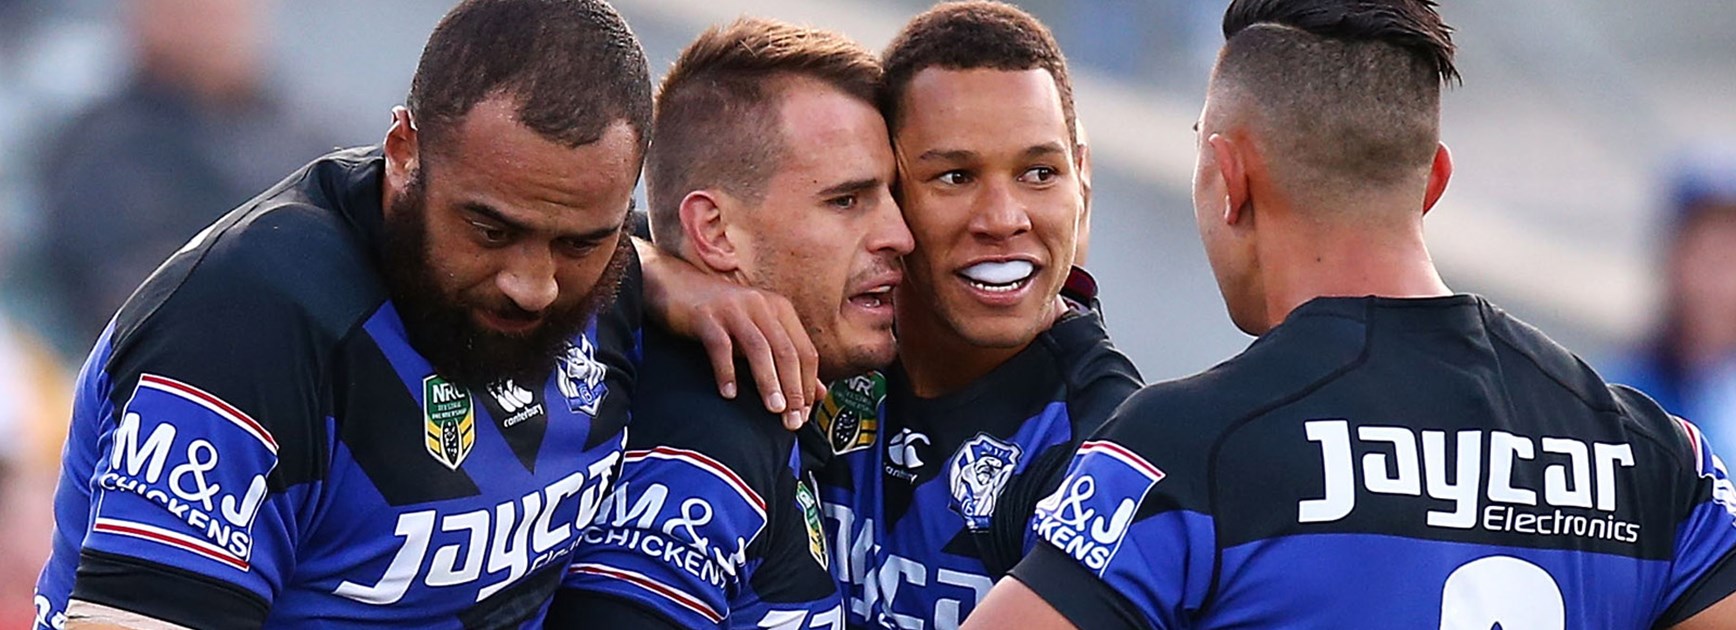 Moses Mbye and Josh Reynolds have a good relationship both on and off the field.